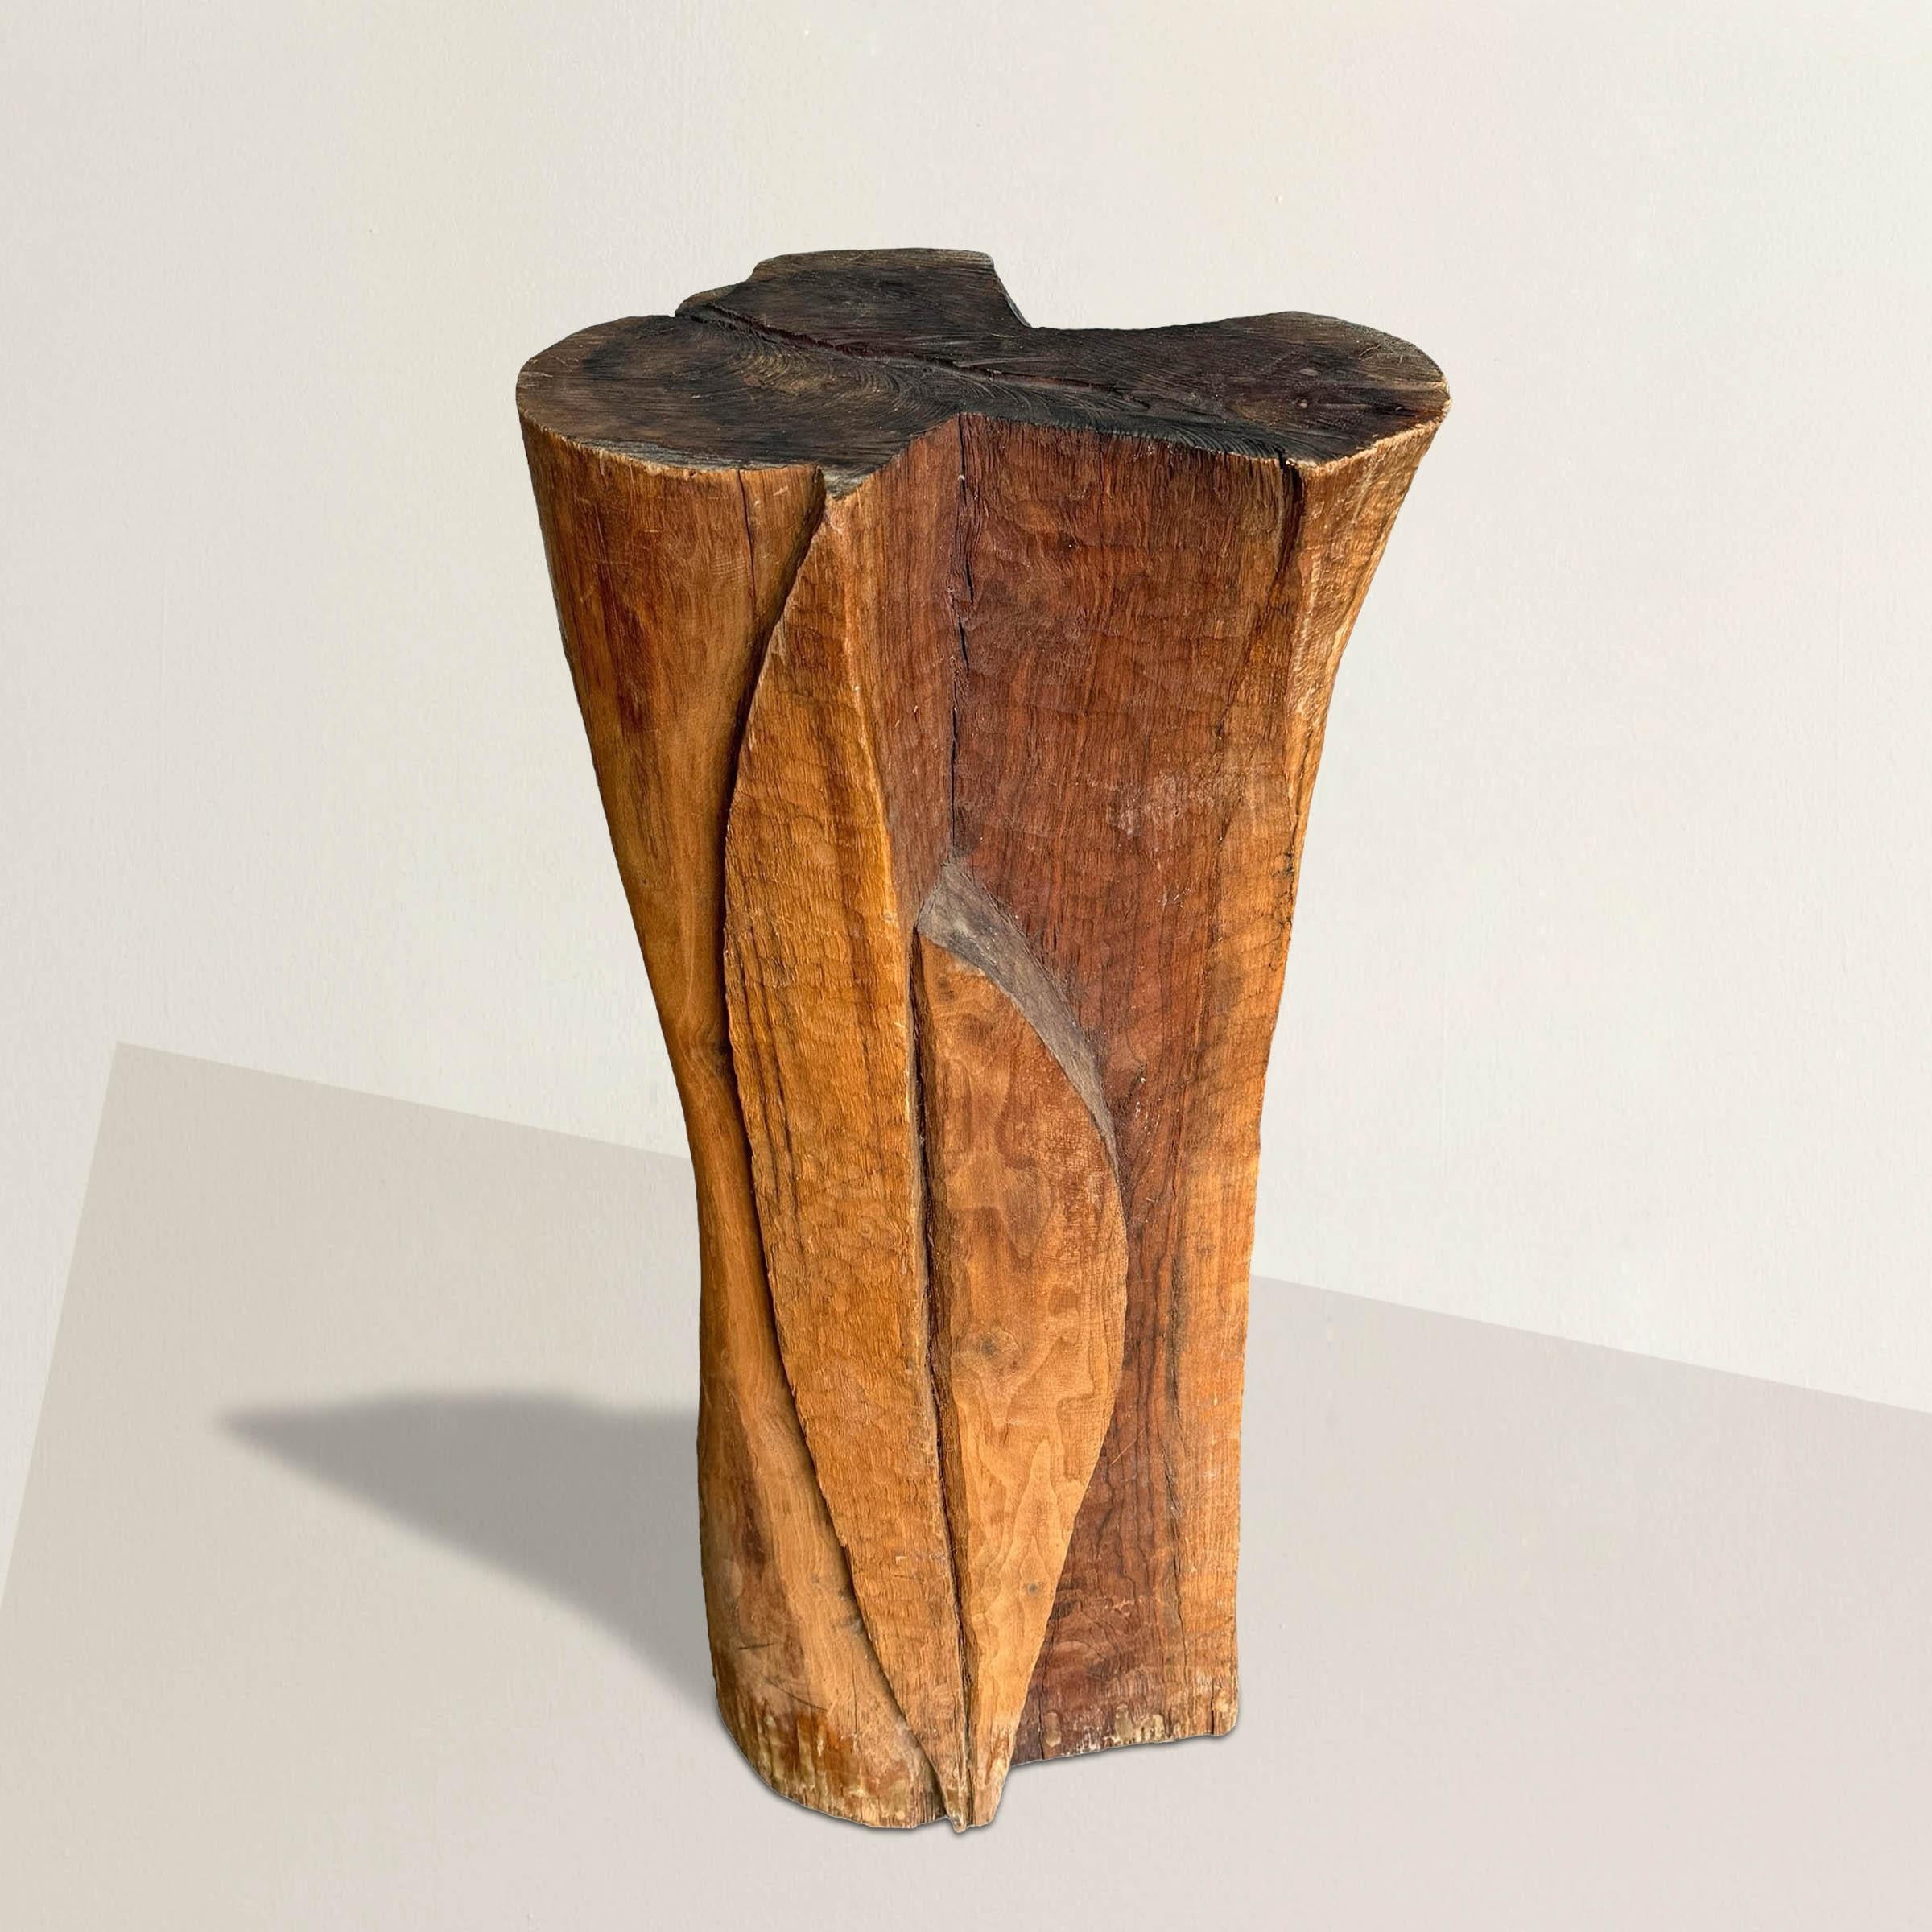 This early 20th-century American Modernist hand-carved wood pedestal is a sculptural masterpiece, evoking the essence of artistic expression and practicality. Adorned with thousands of meticulously carved chips, its surface invites touch and